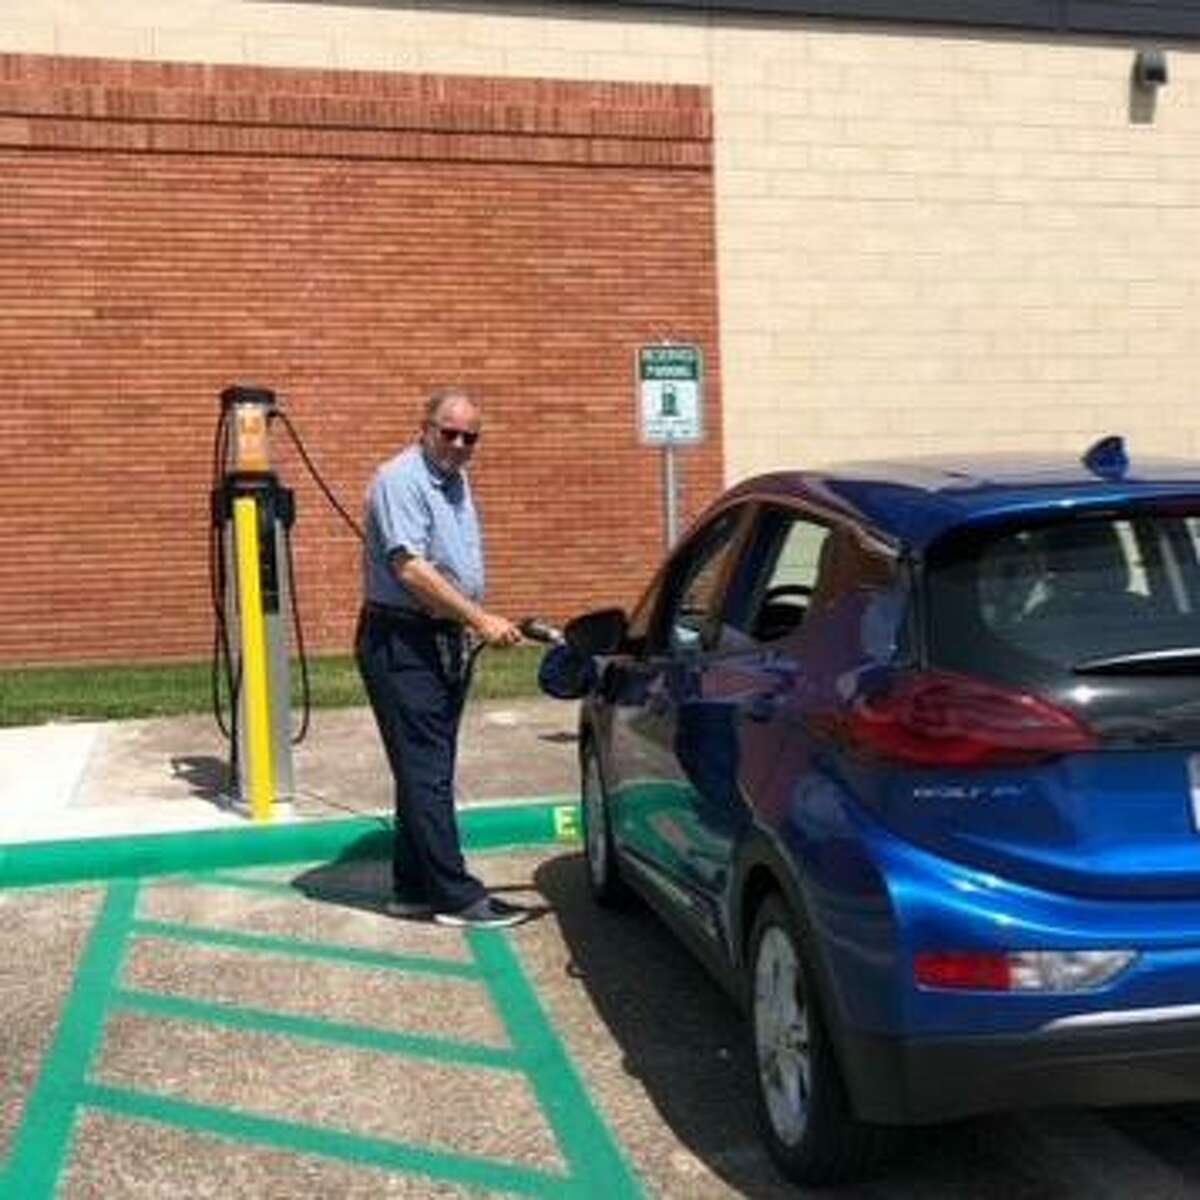 An electric vehicle charging station is available in front of the Lamar University Police Department building.